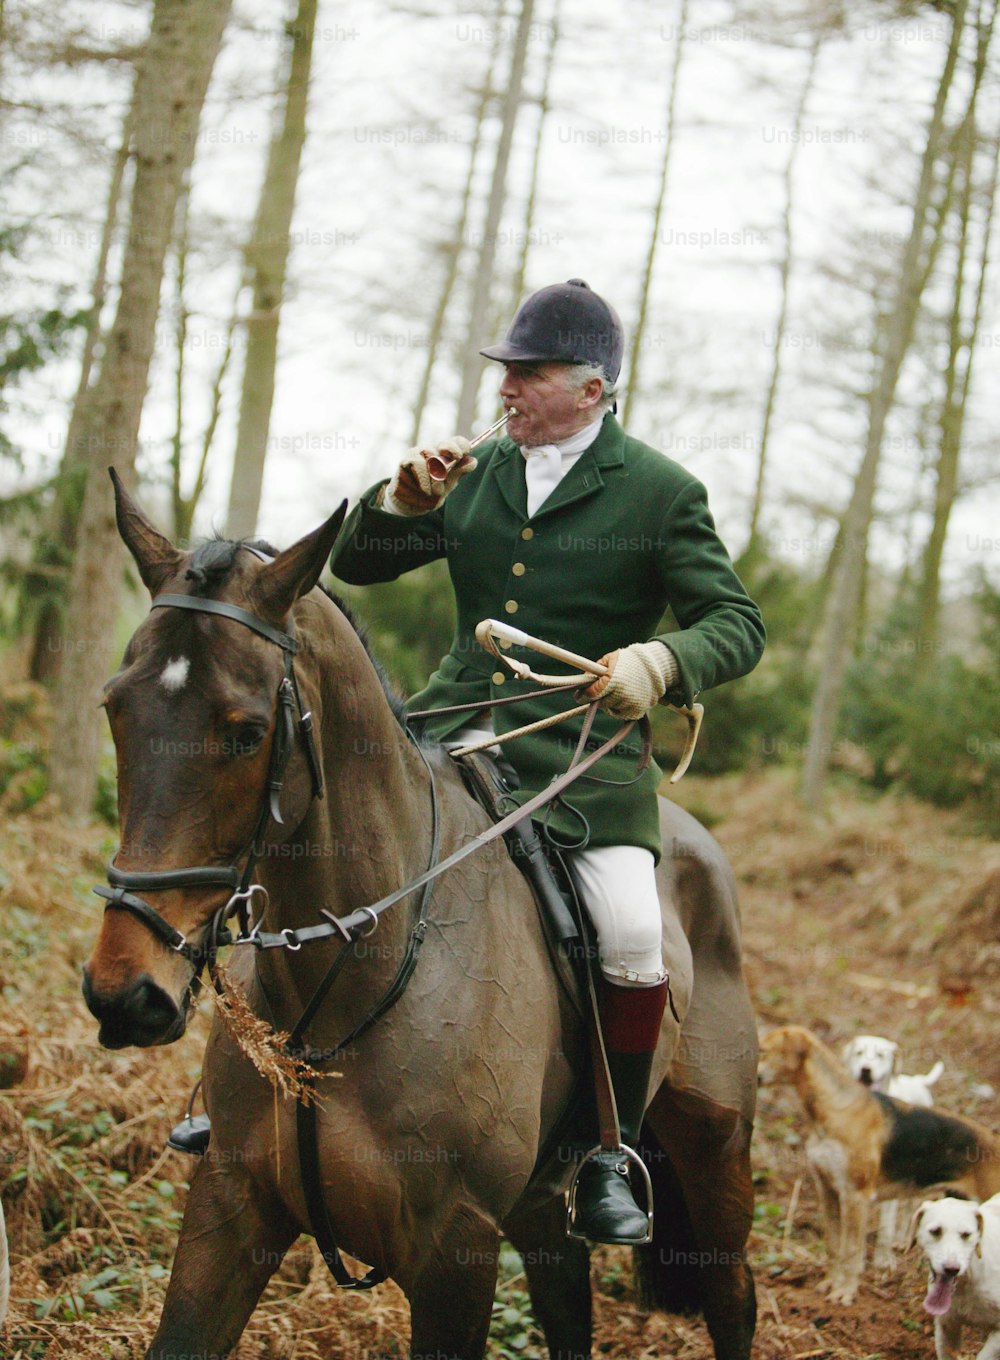 GLOUCESTERSHIRE, ENGLAND - DECEMBER 26:  A man blows a horn during the traditional fox and hound hunt on boxing day, December 26, 2003 in Gloucestershire, England. Despite the rain many countryside supporters turned out in support of the hunt, a controversial tradition in the countryside of England. A bill deciding the future of the hunt is currently in sitting in English Parliament.